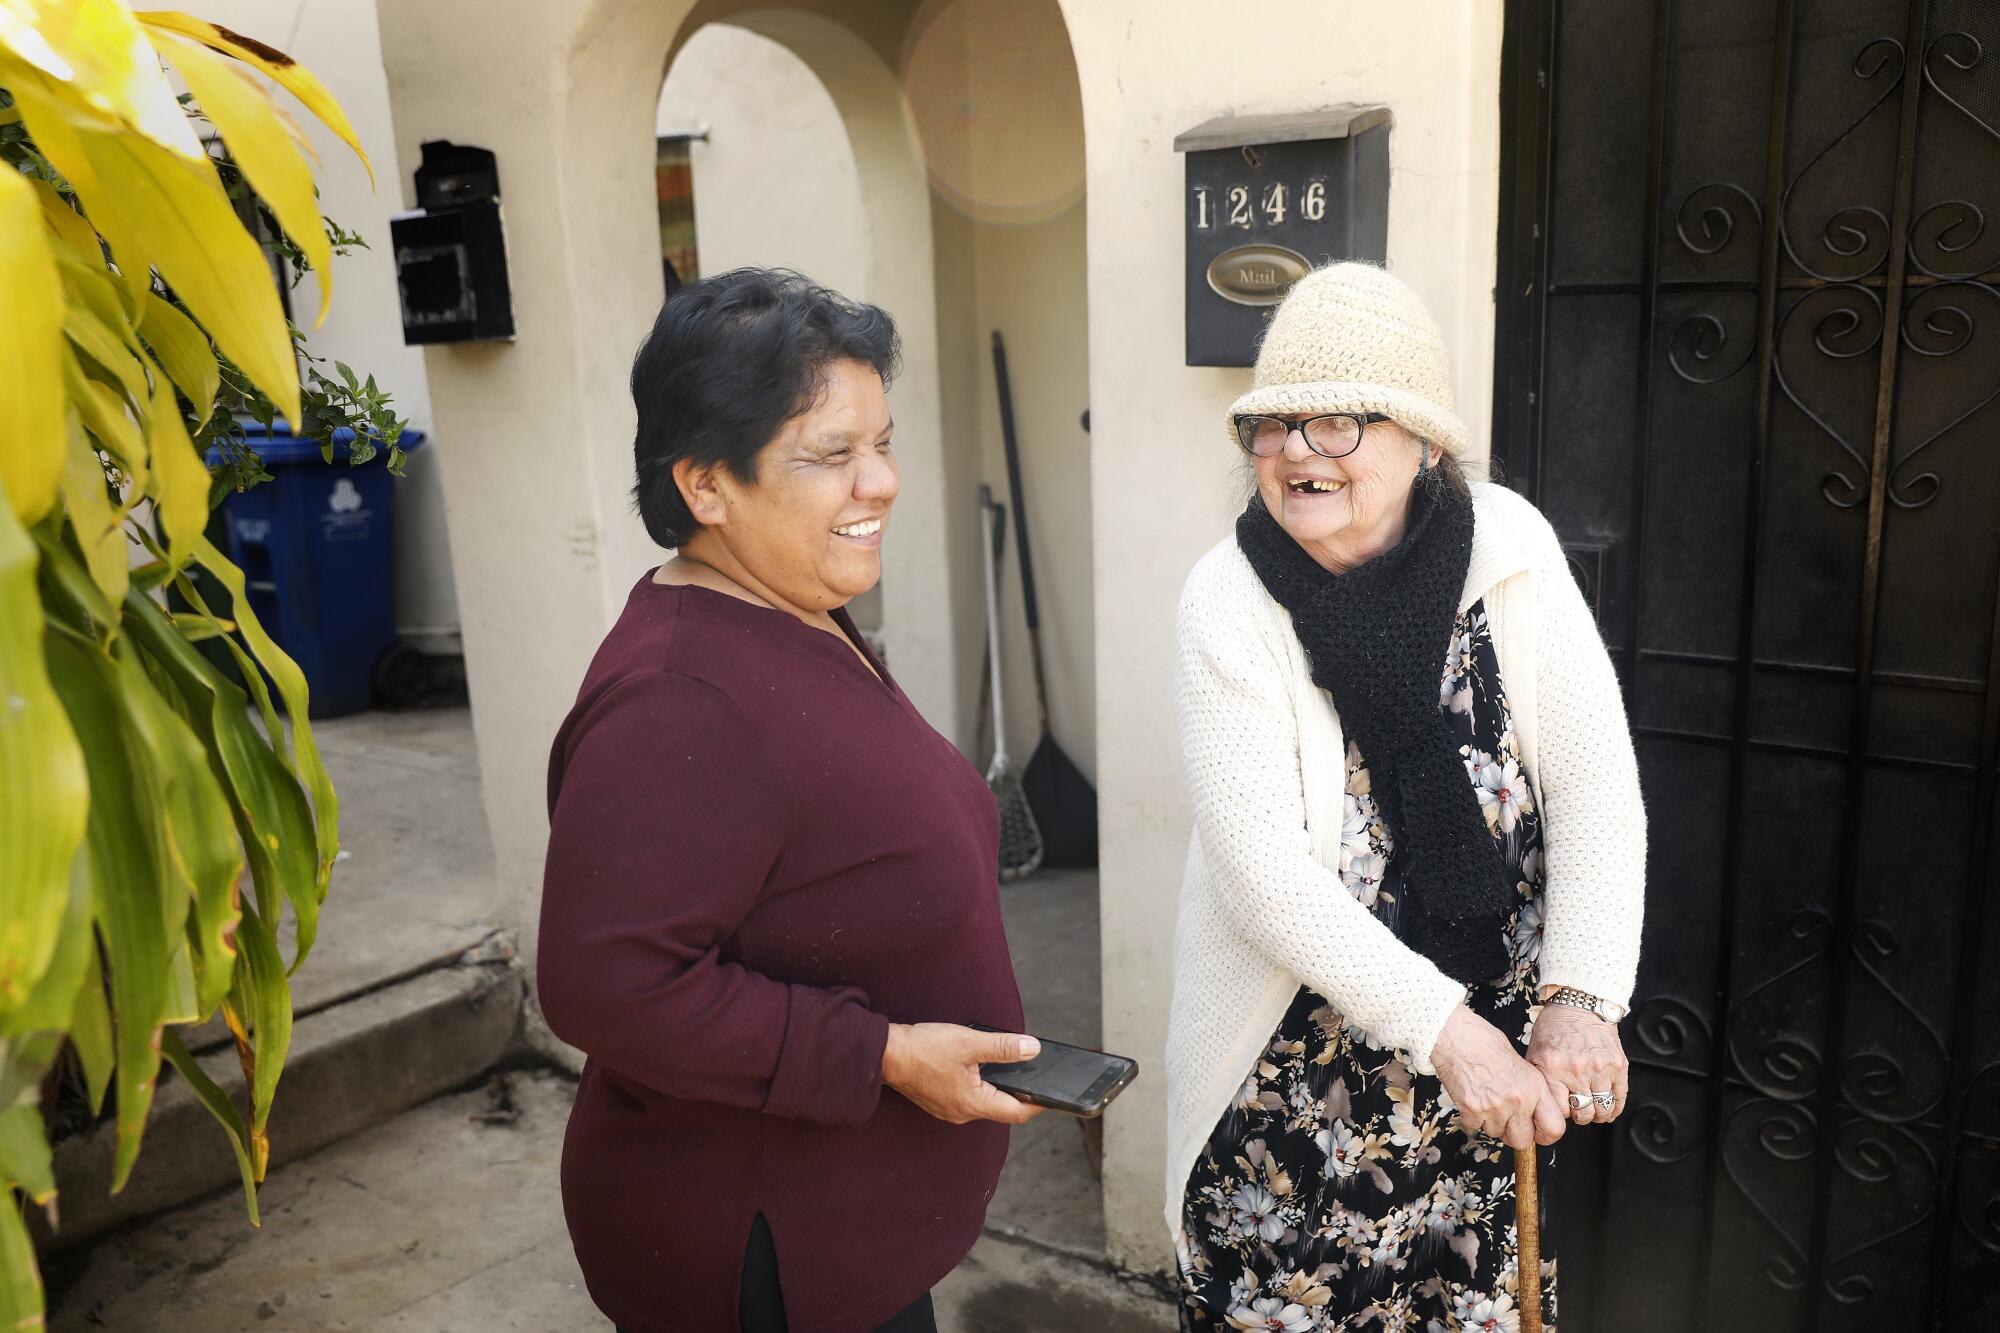 Neighbors Elvira Rincon, left, and Virginia Watson, right, share a laugh outside of Watson's apartment.